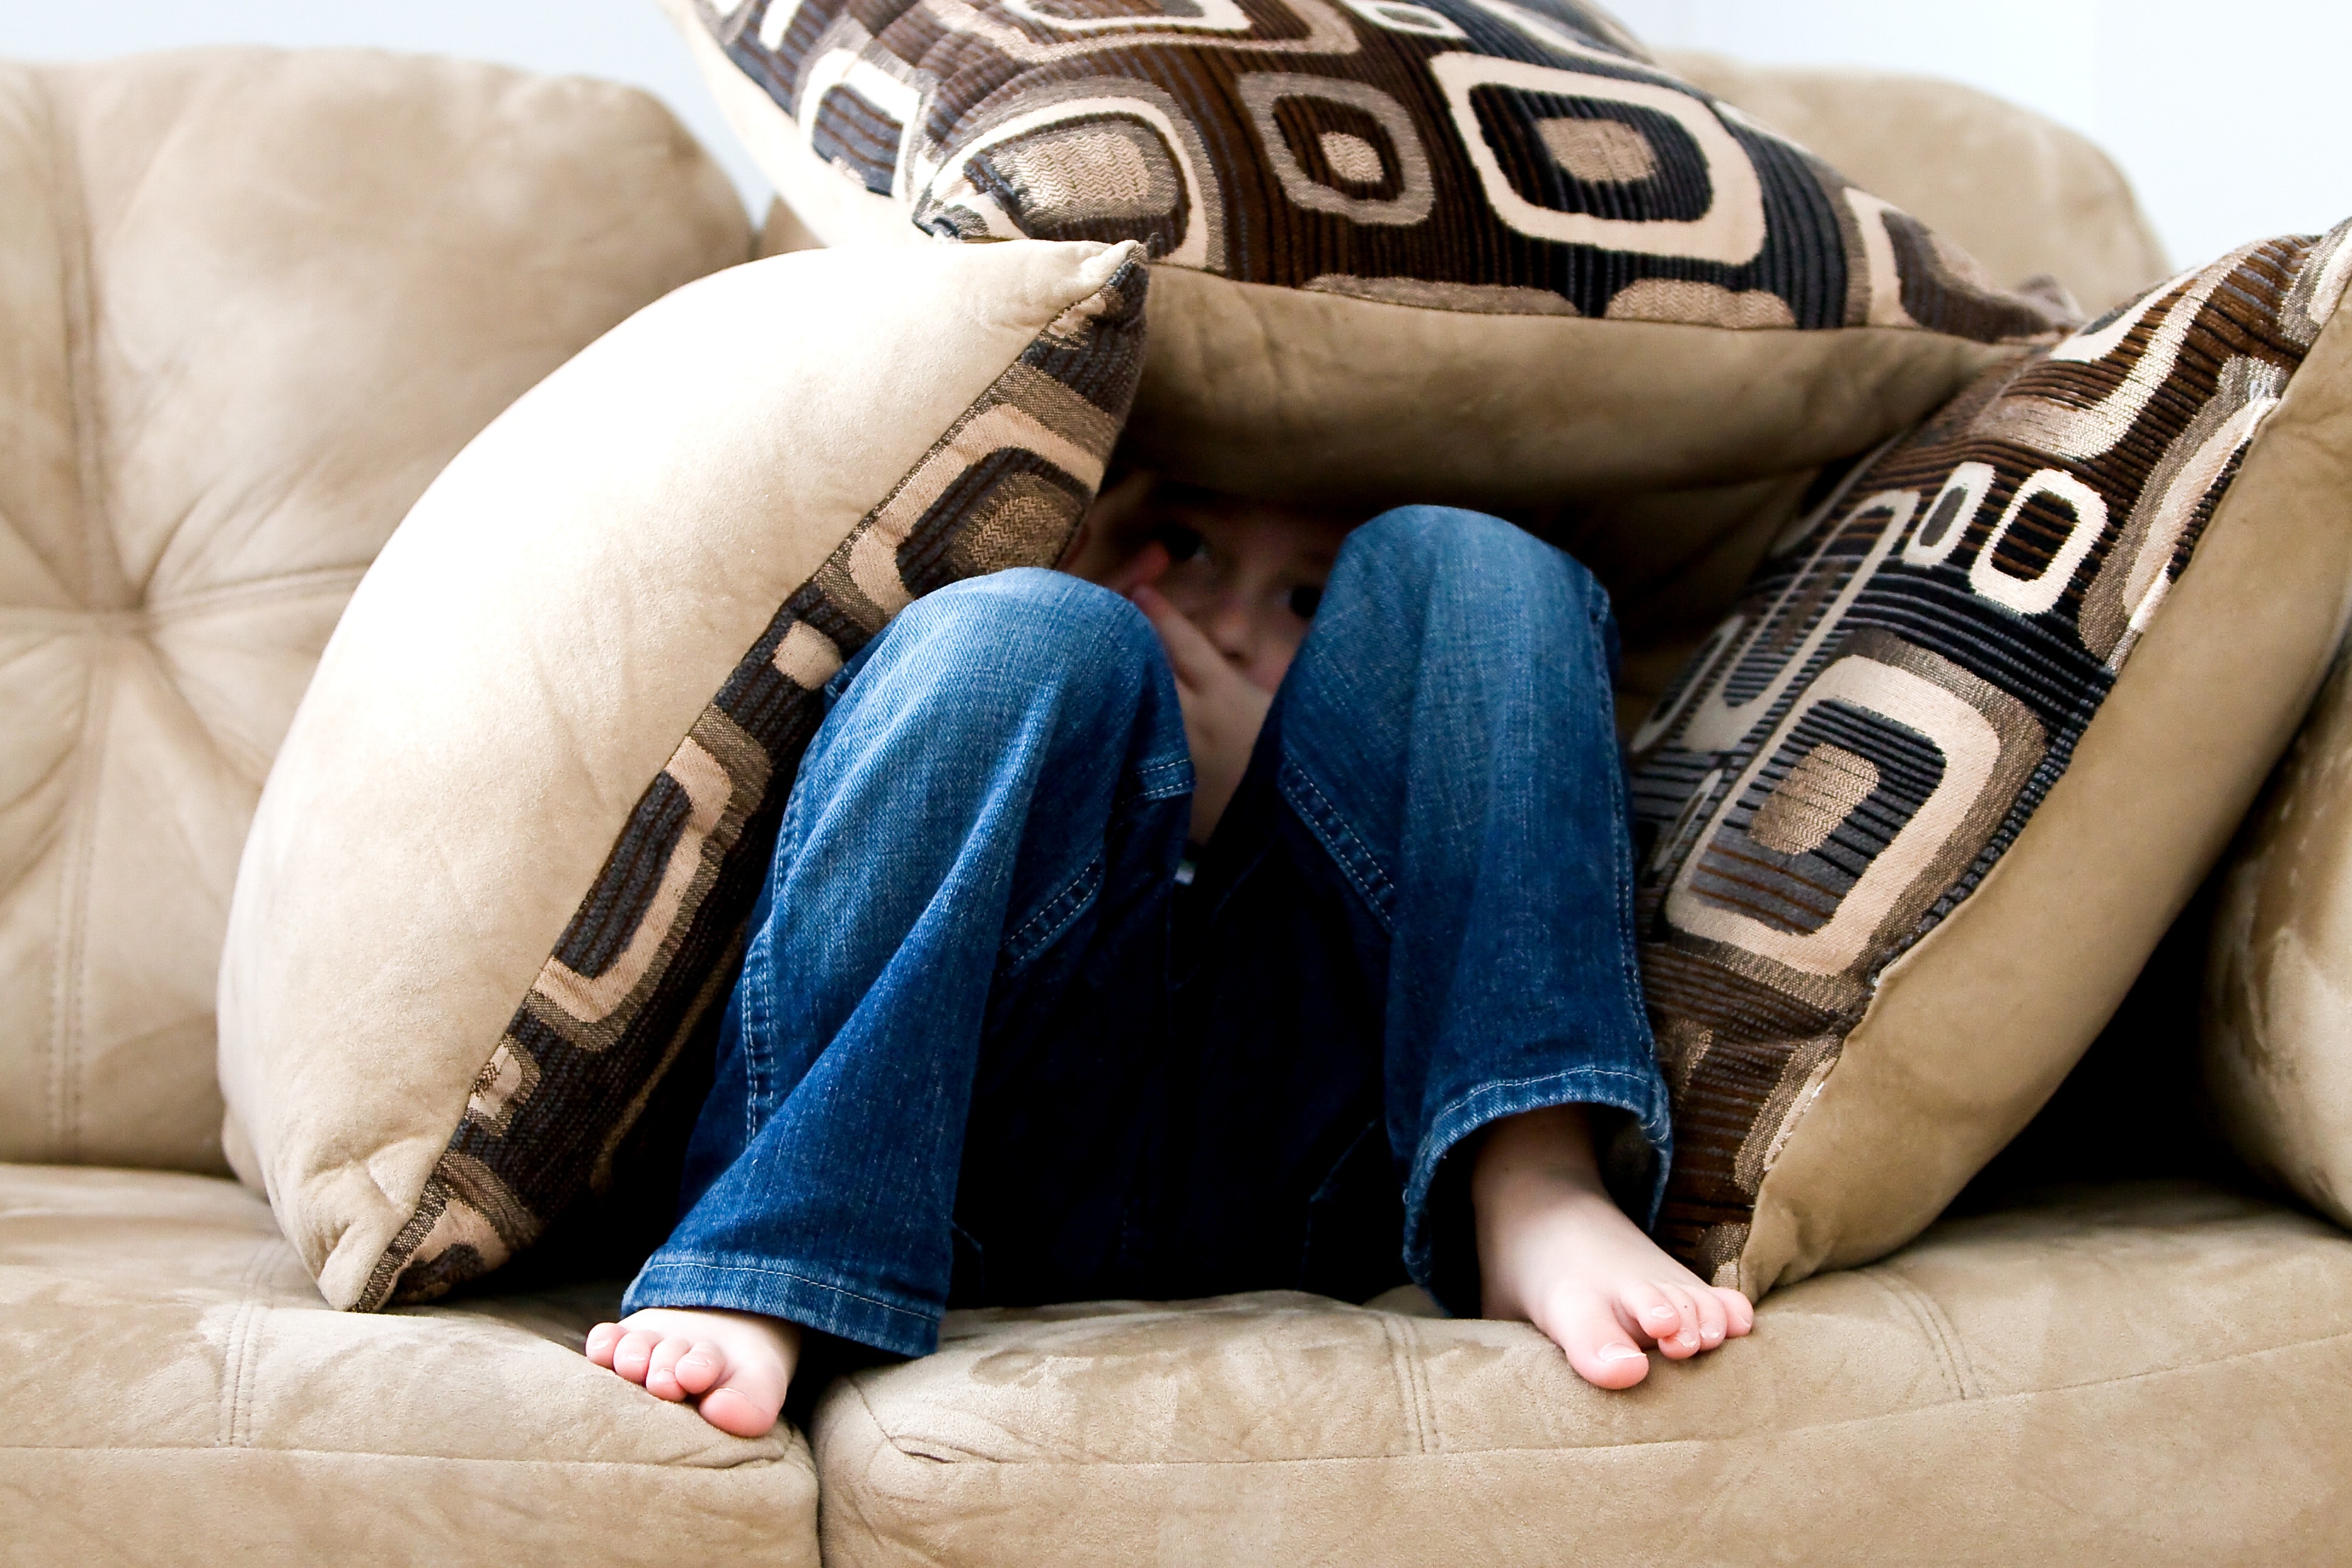 Williamsburg Therapy Group, Child on couch hiding under pillow